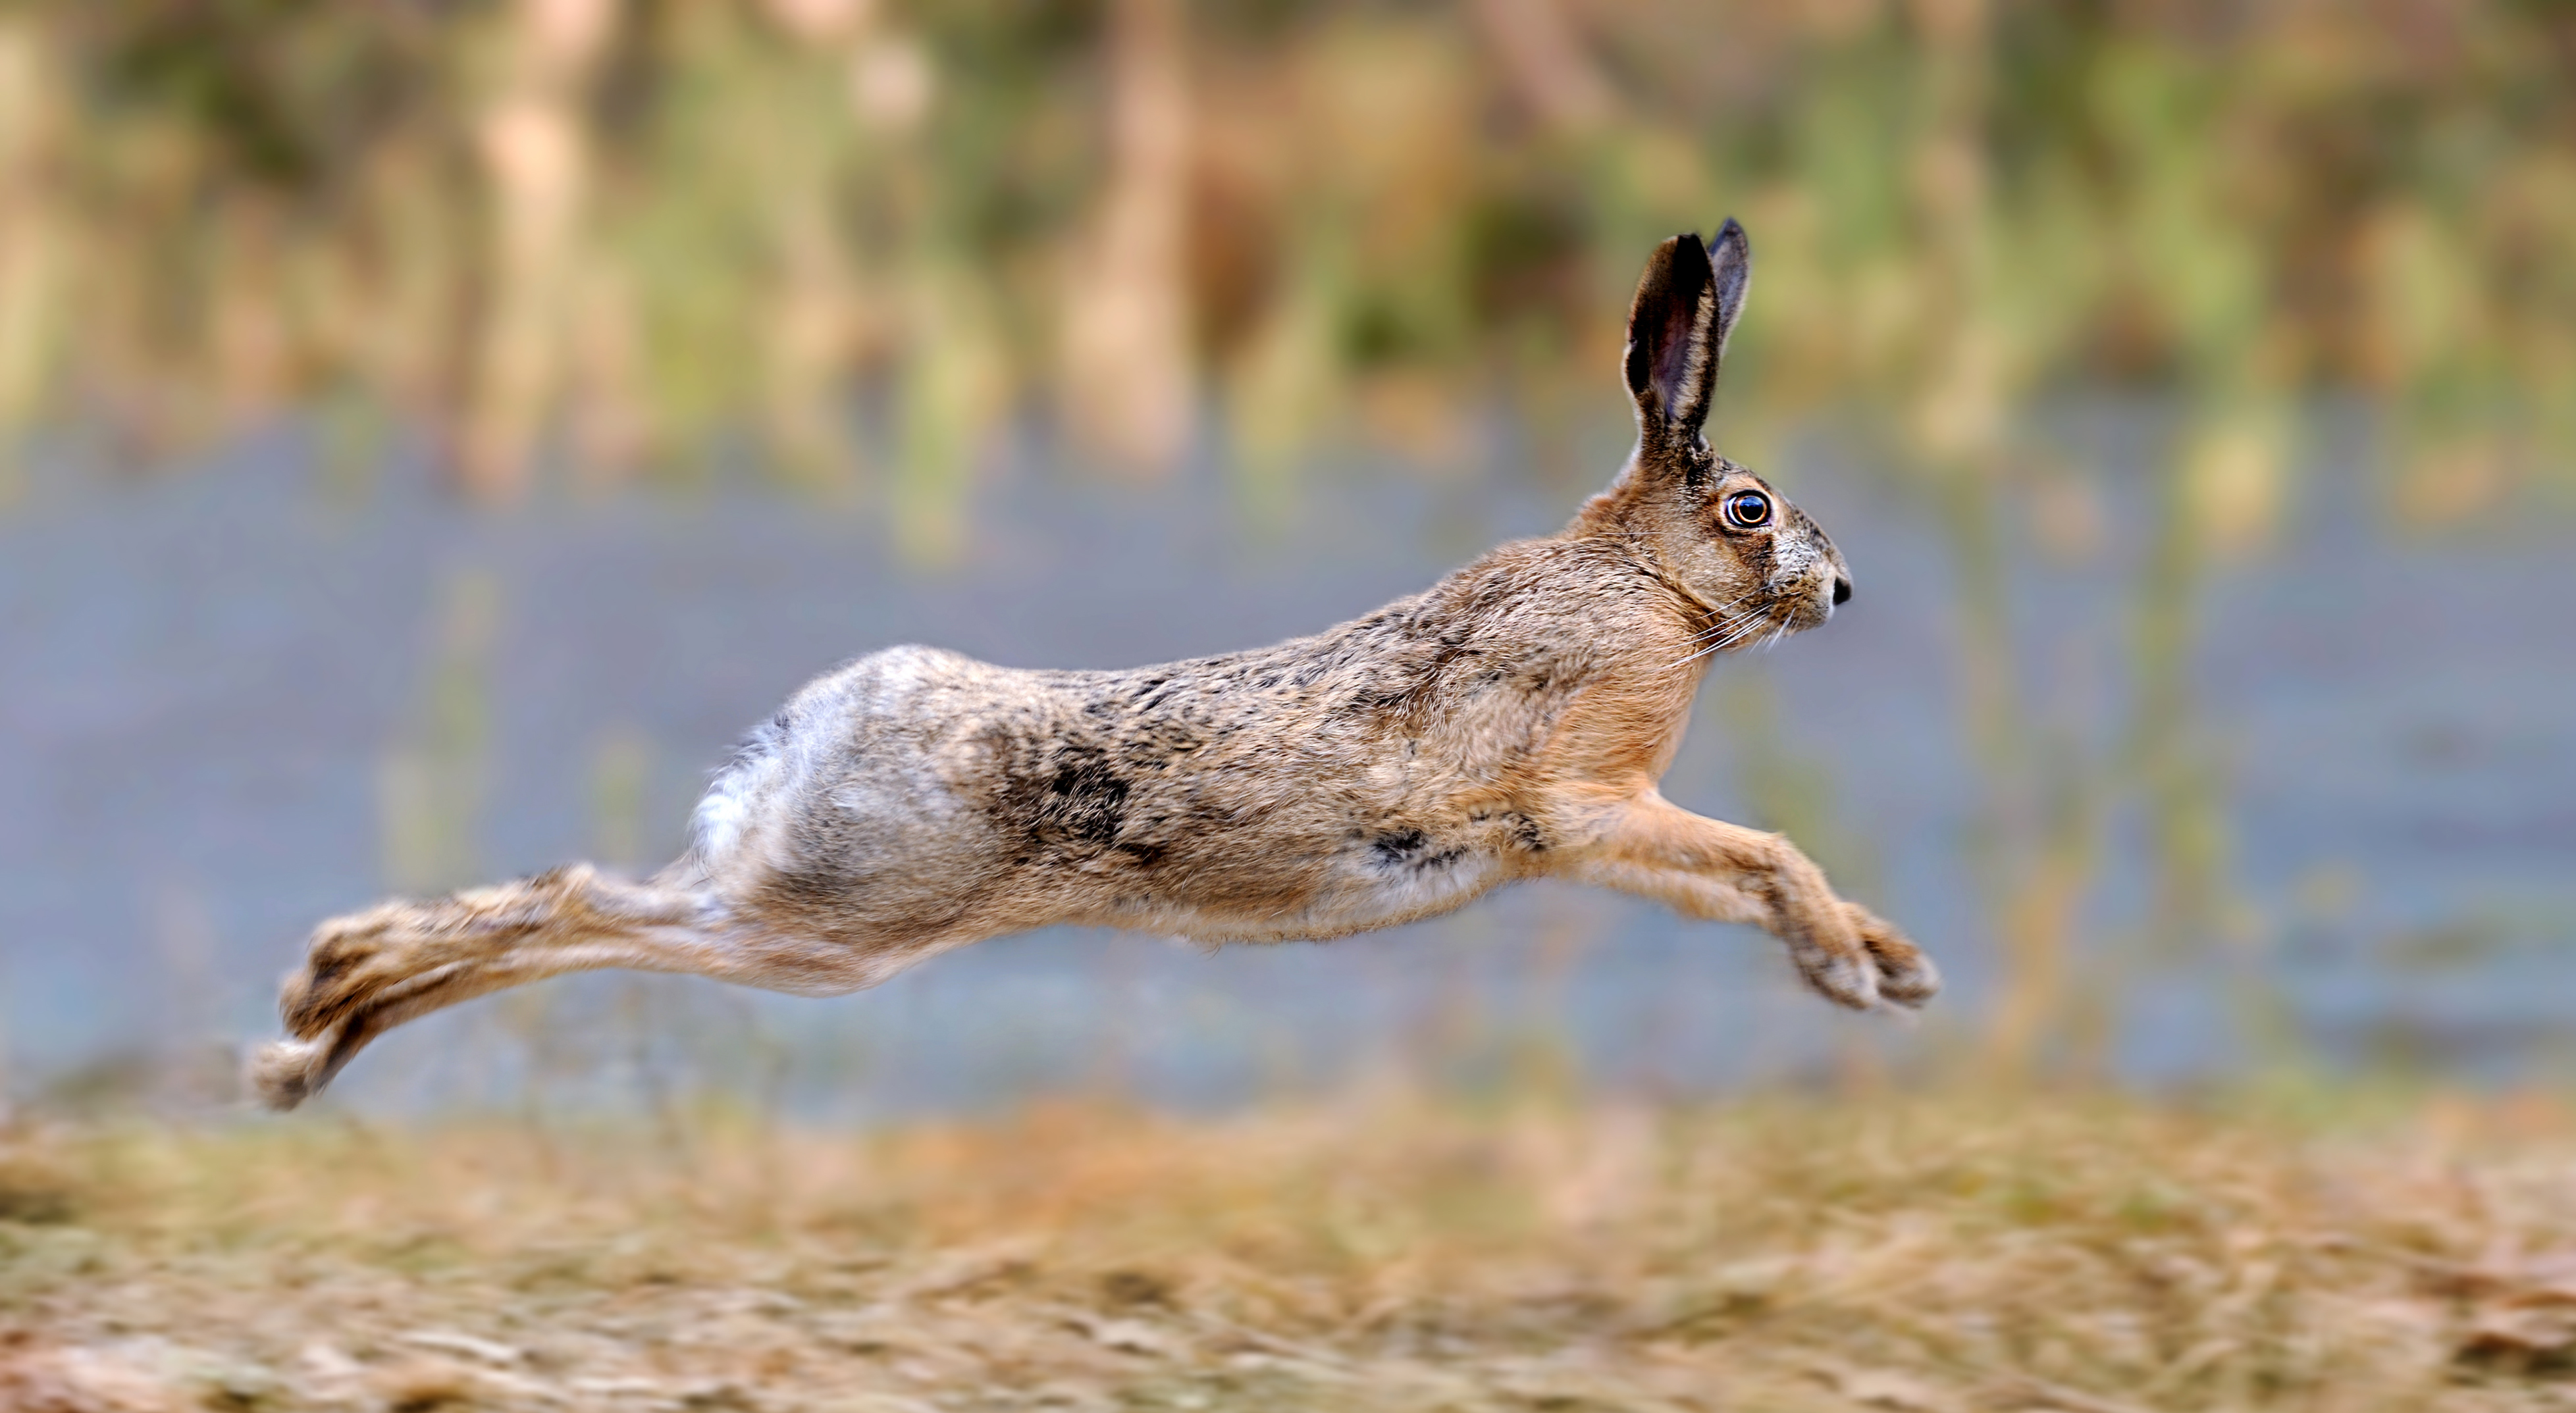 British Ecological Society image of a hare